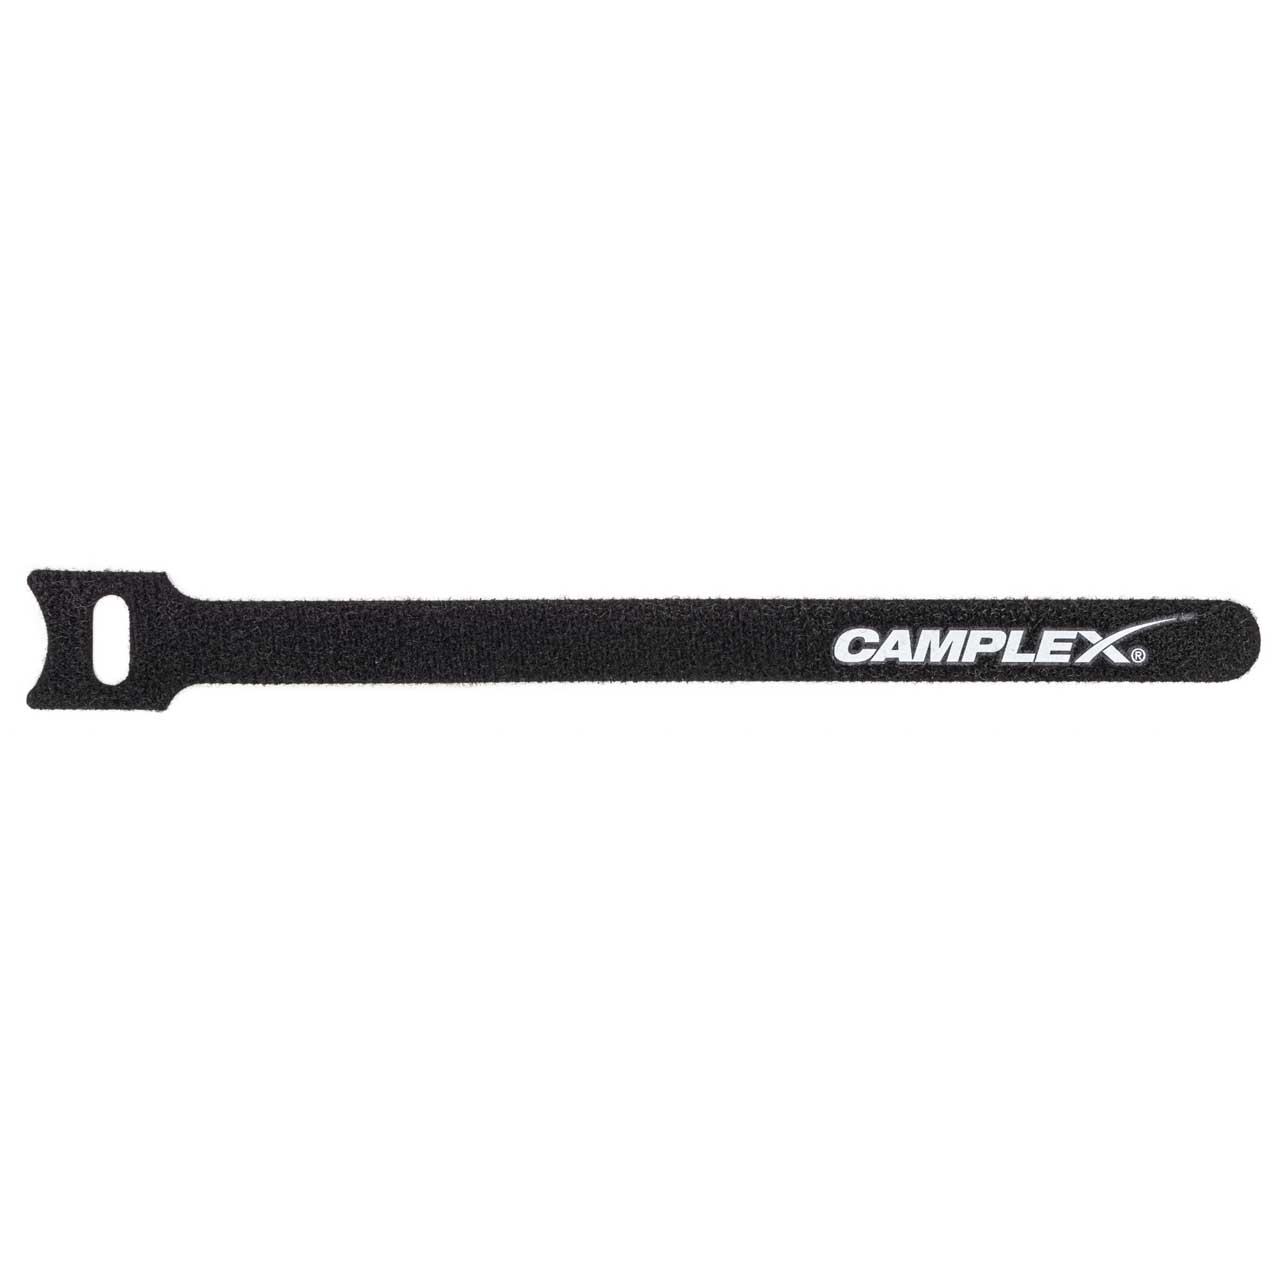 Camplex Hook and Loop Cable Wrap 12mm x 180mm Black with White Logo - 1000 Pack CMX-HKNLP-1000PK